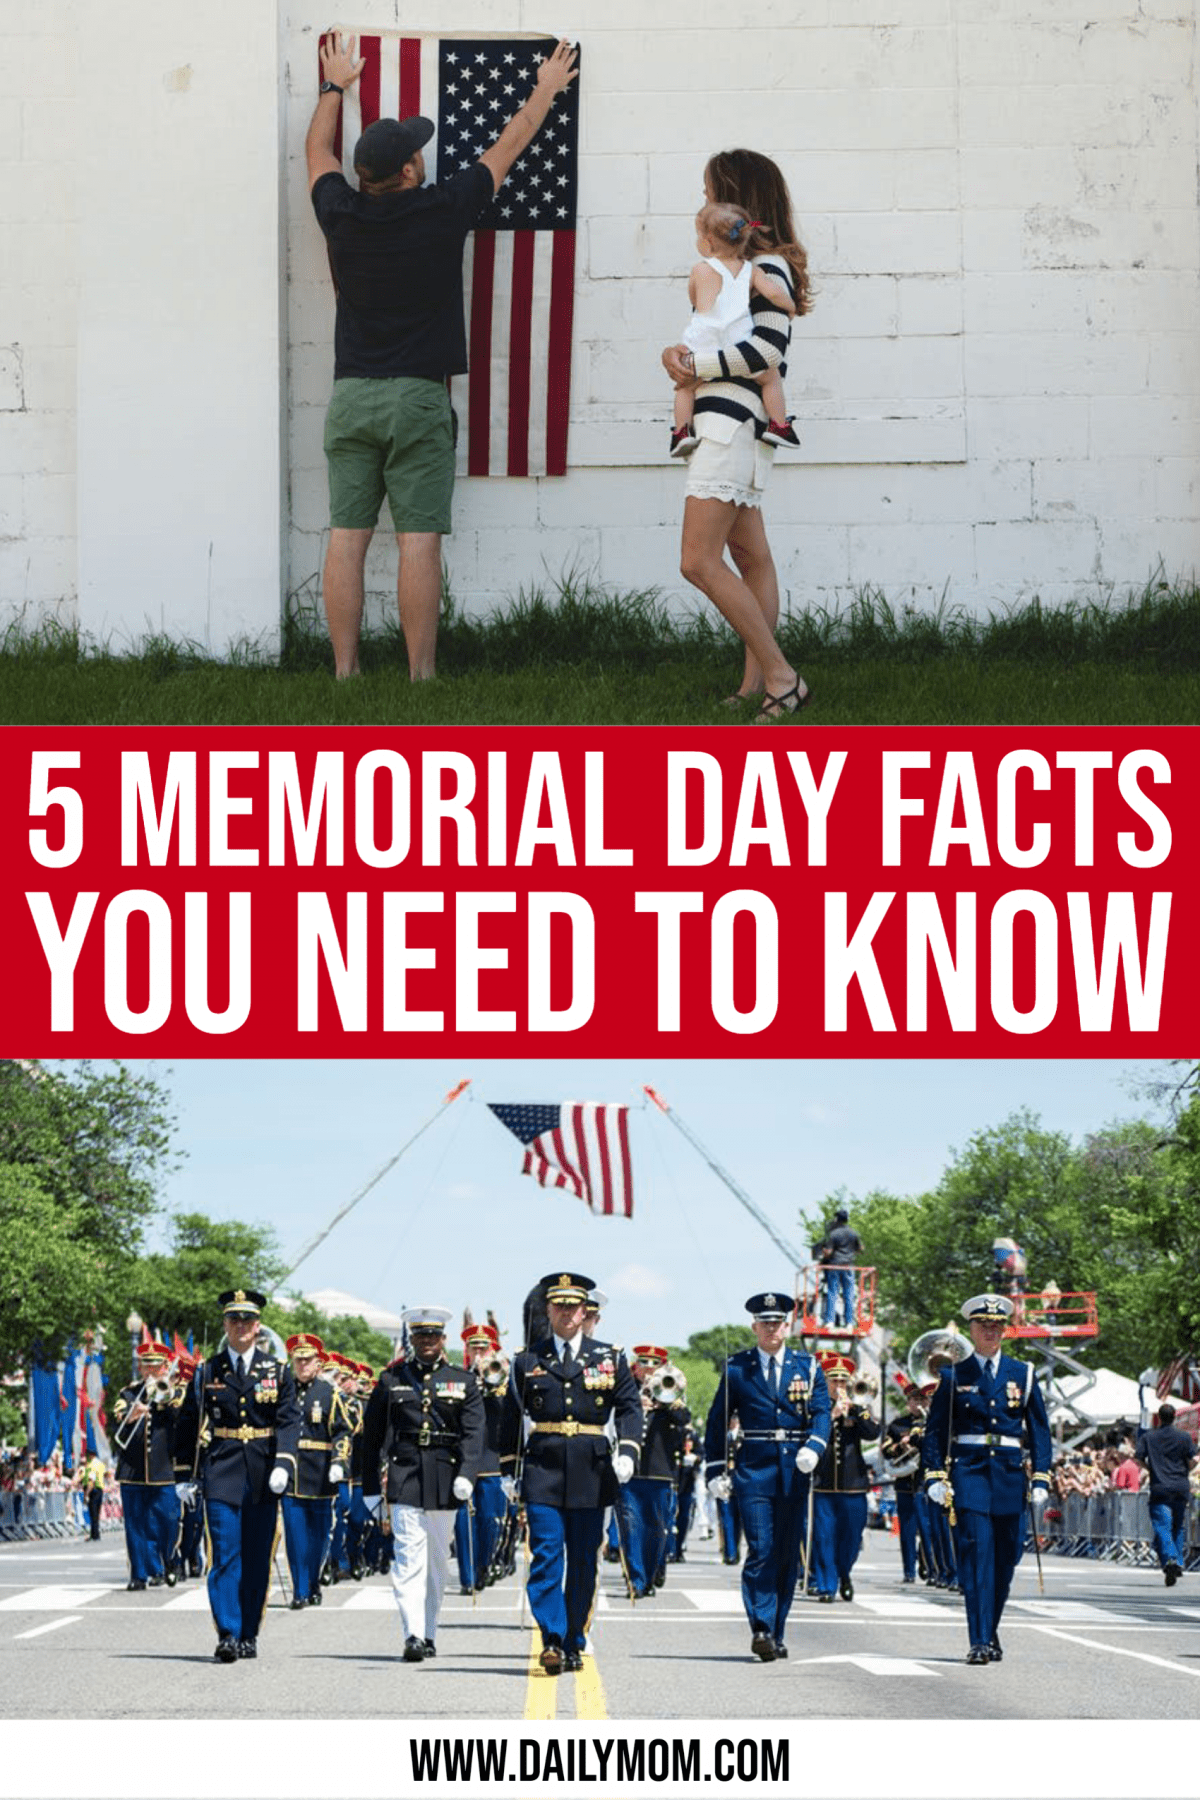 5-memorial-day-facts-you-need-to-know-read-now